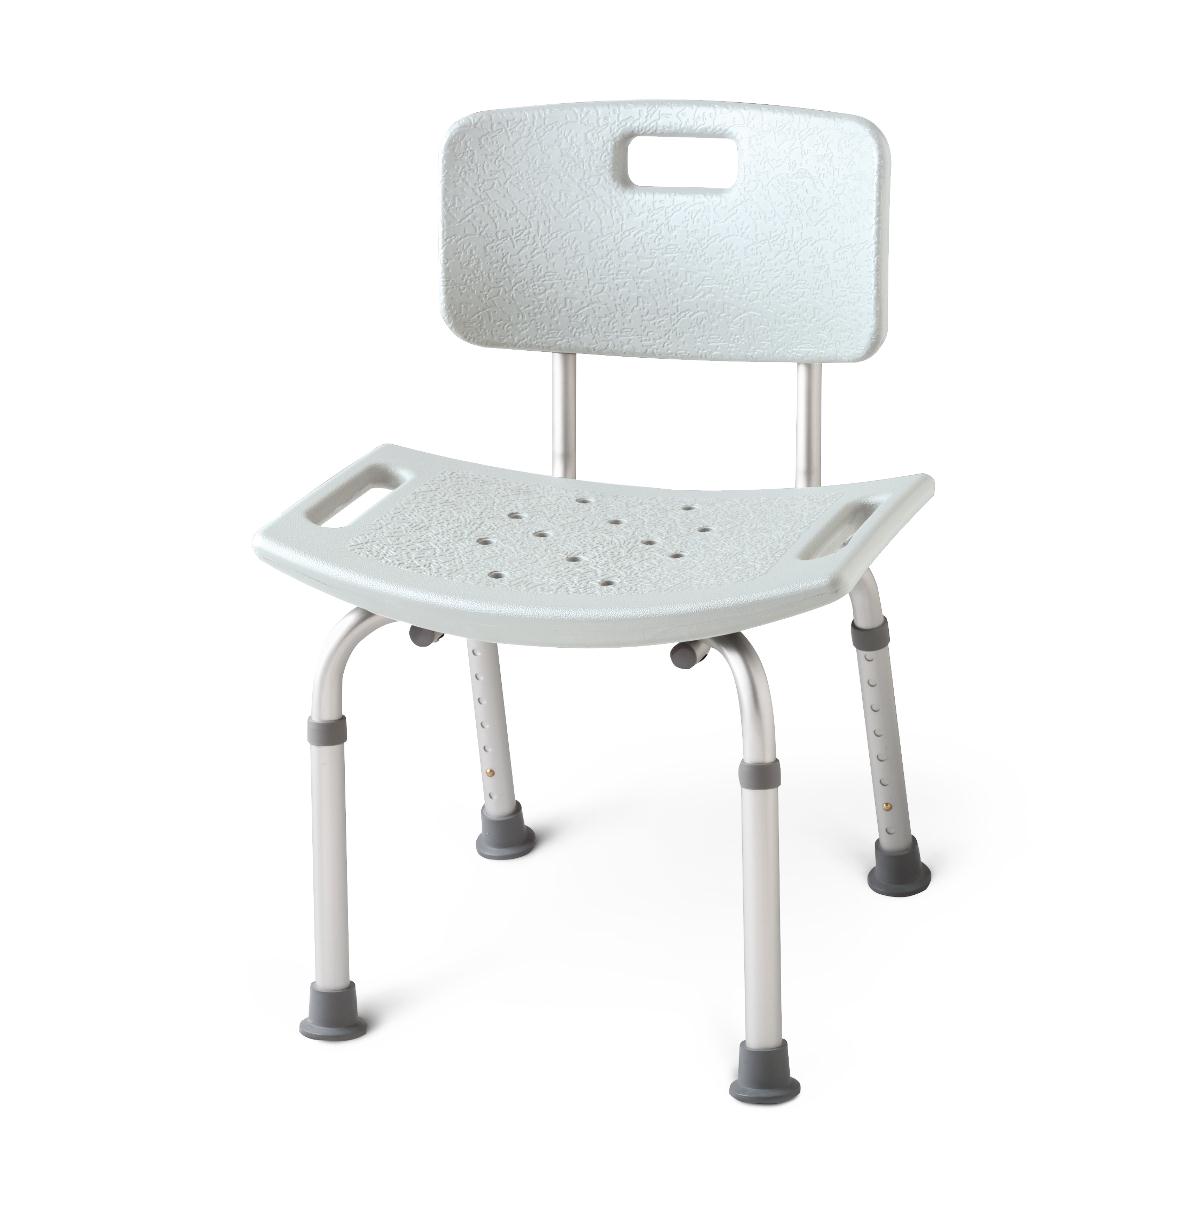 Aluminum Bath Bench with Back by Medline